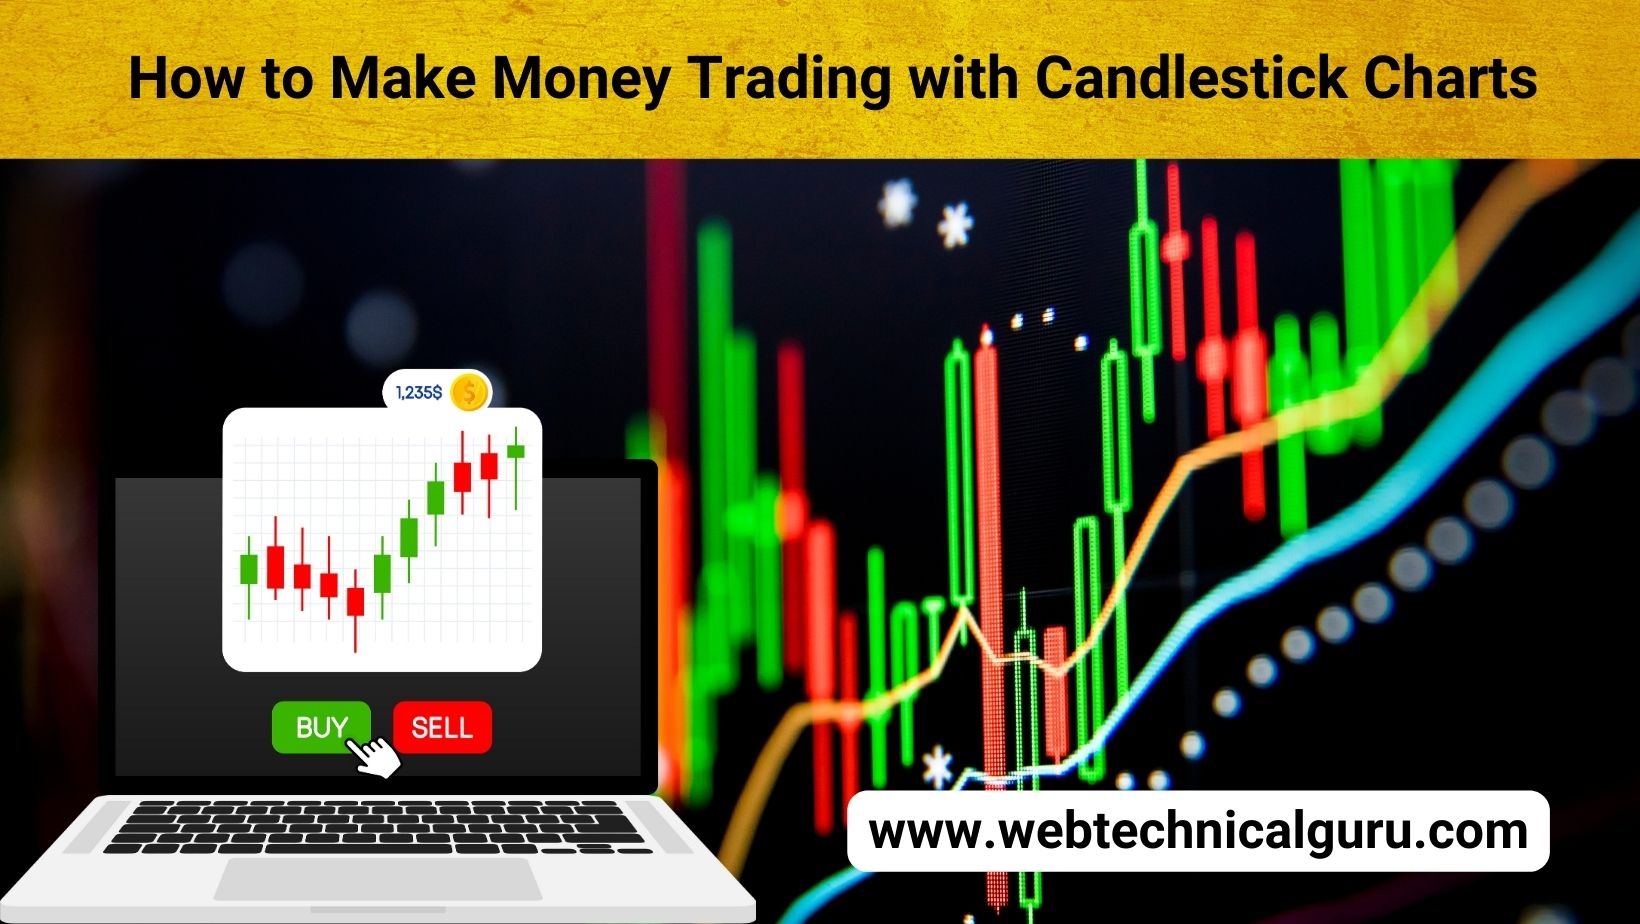 How to Make Money Trading with Candlestick Charts